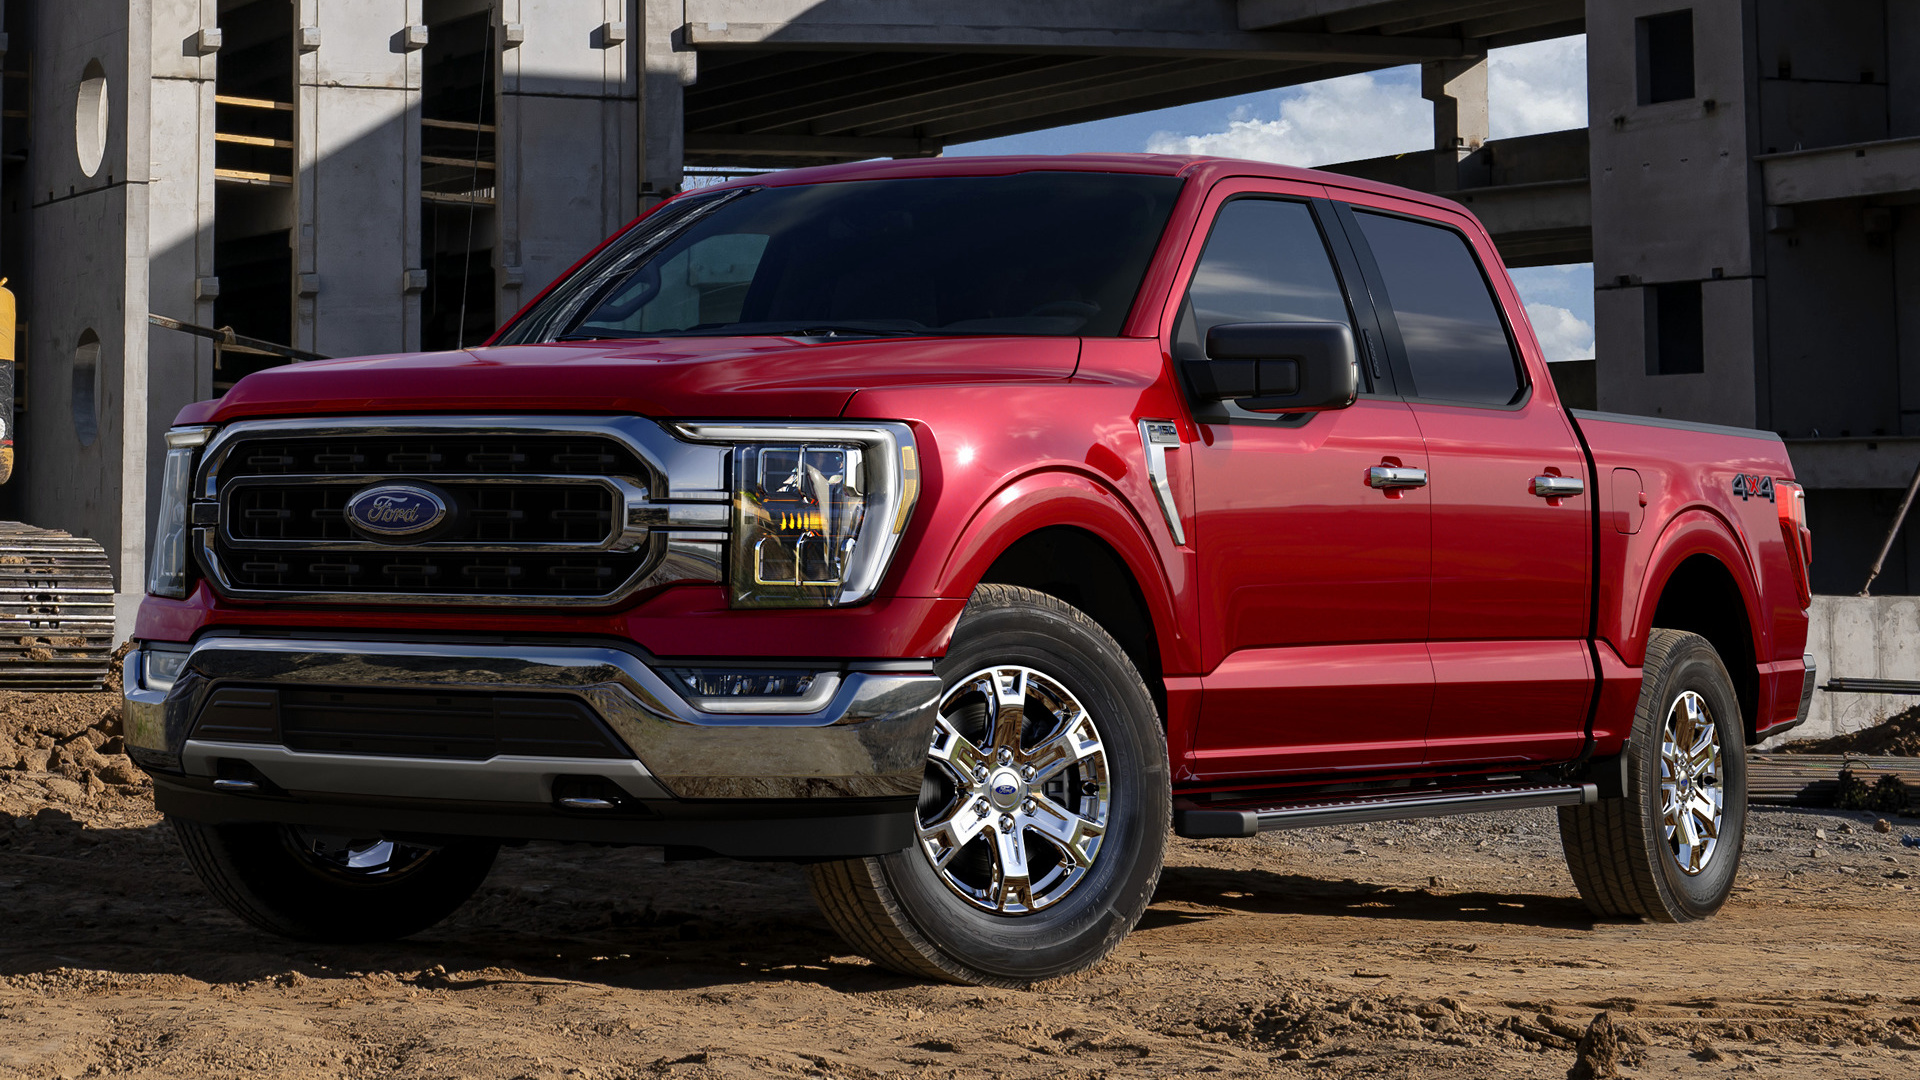 Free Download 2021 Ford F 150 XLT SuperCrew Wallpaper And HD Image Car Pixel [1920x1080] For Your Desktop, Mobile & Tablet. Explore Ford F 150 2021 Wallpaper. Ford F 150